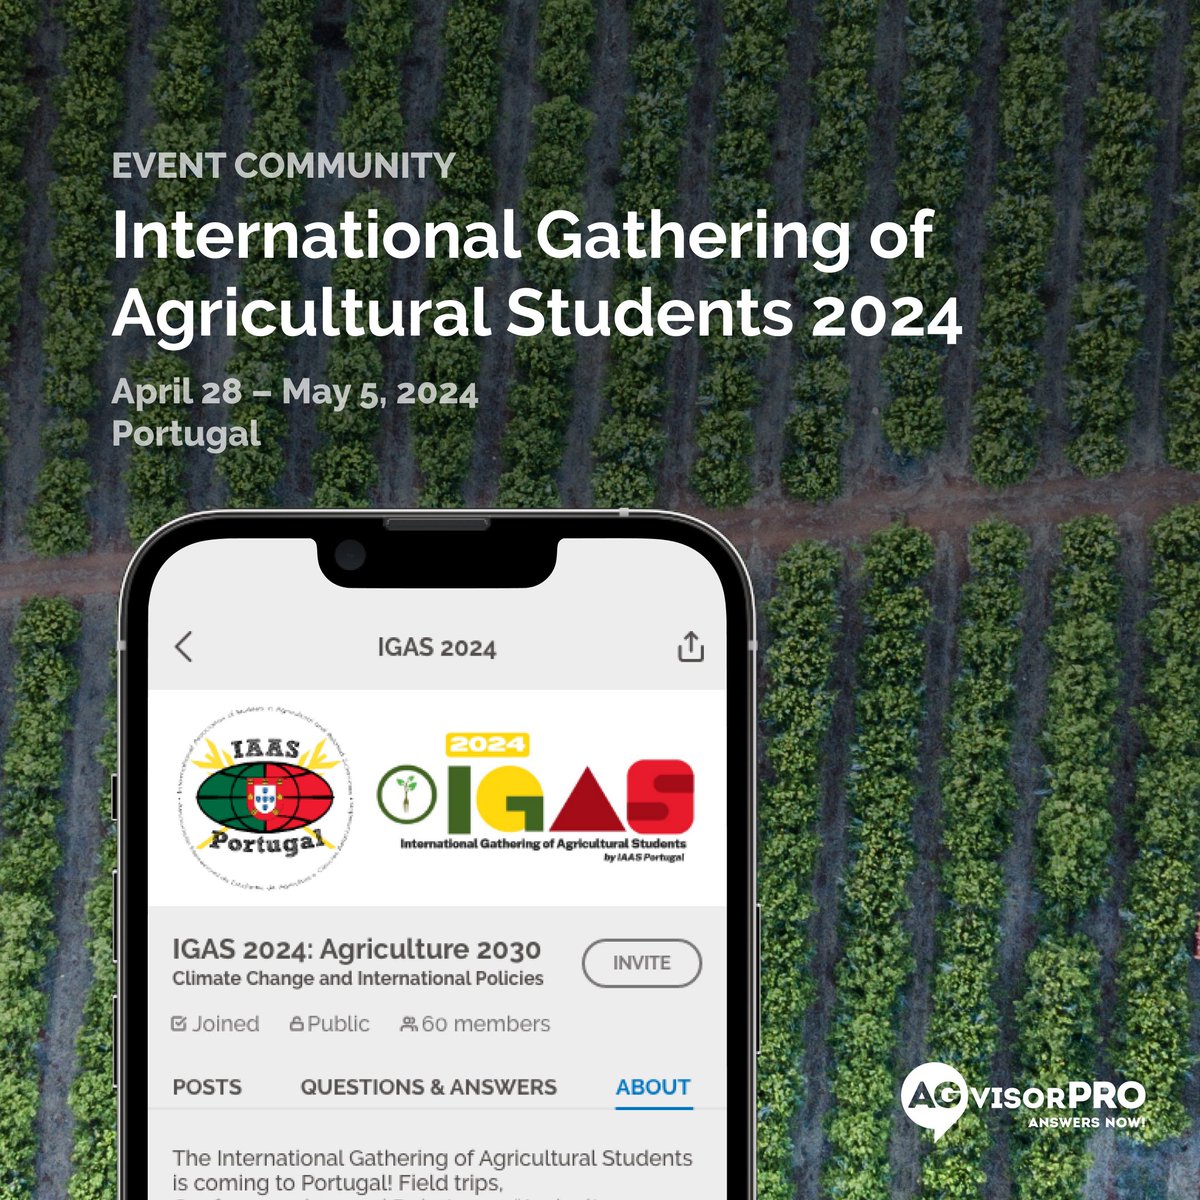 FOR IMMEDIATE RELEASE: AGvisorPRO is teaming up with IAAS Portugal for the 2024 International Gathering of Agriculture Students (IGAS)! 🌍 Explore the future of agriculture on AGvisorPRO, the official event community platform! Full PR: remote.ag/3xKe9uB